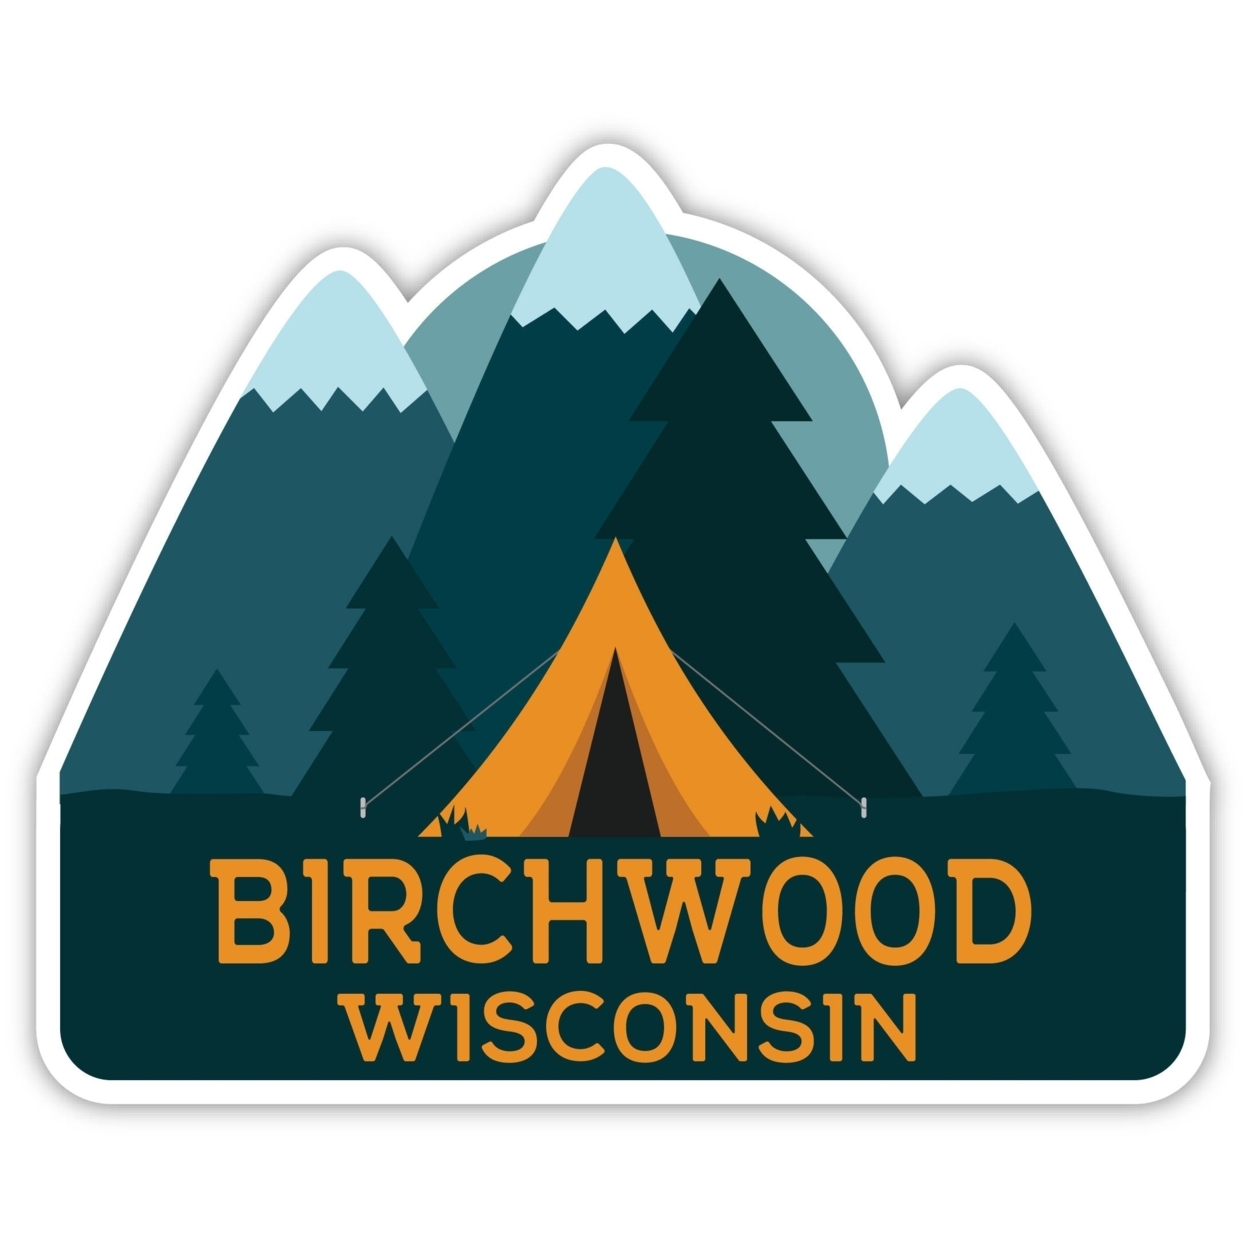 Birchwood Wisconsin Souvenir Decorative Stickers (Choose Theme And Size) - 4-Pack, 10-Inch, Tent